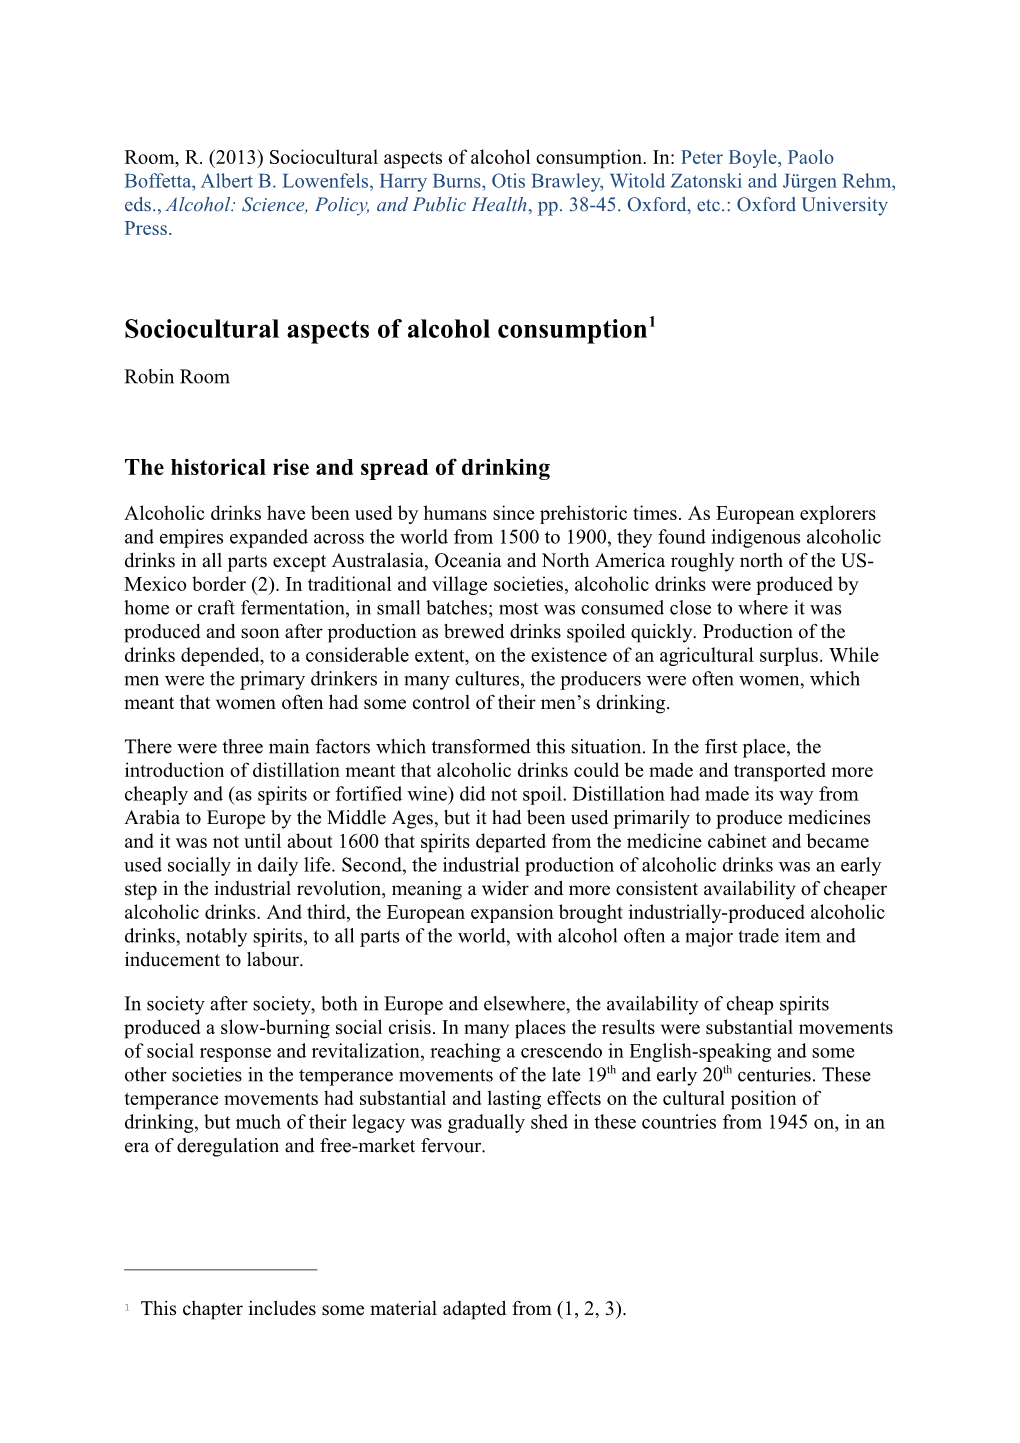 The Historical Rise and Spread of Drinking